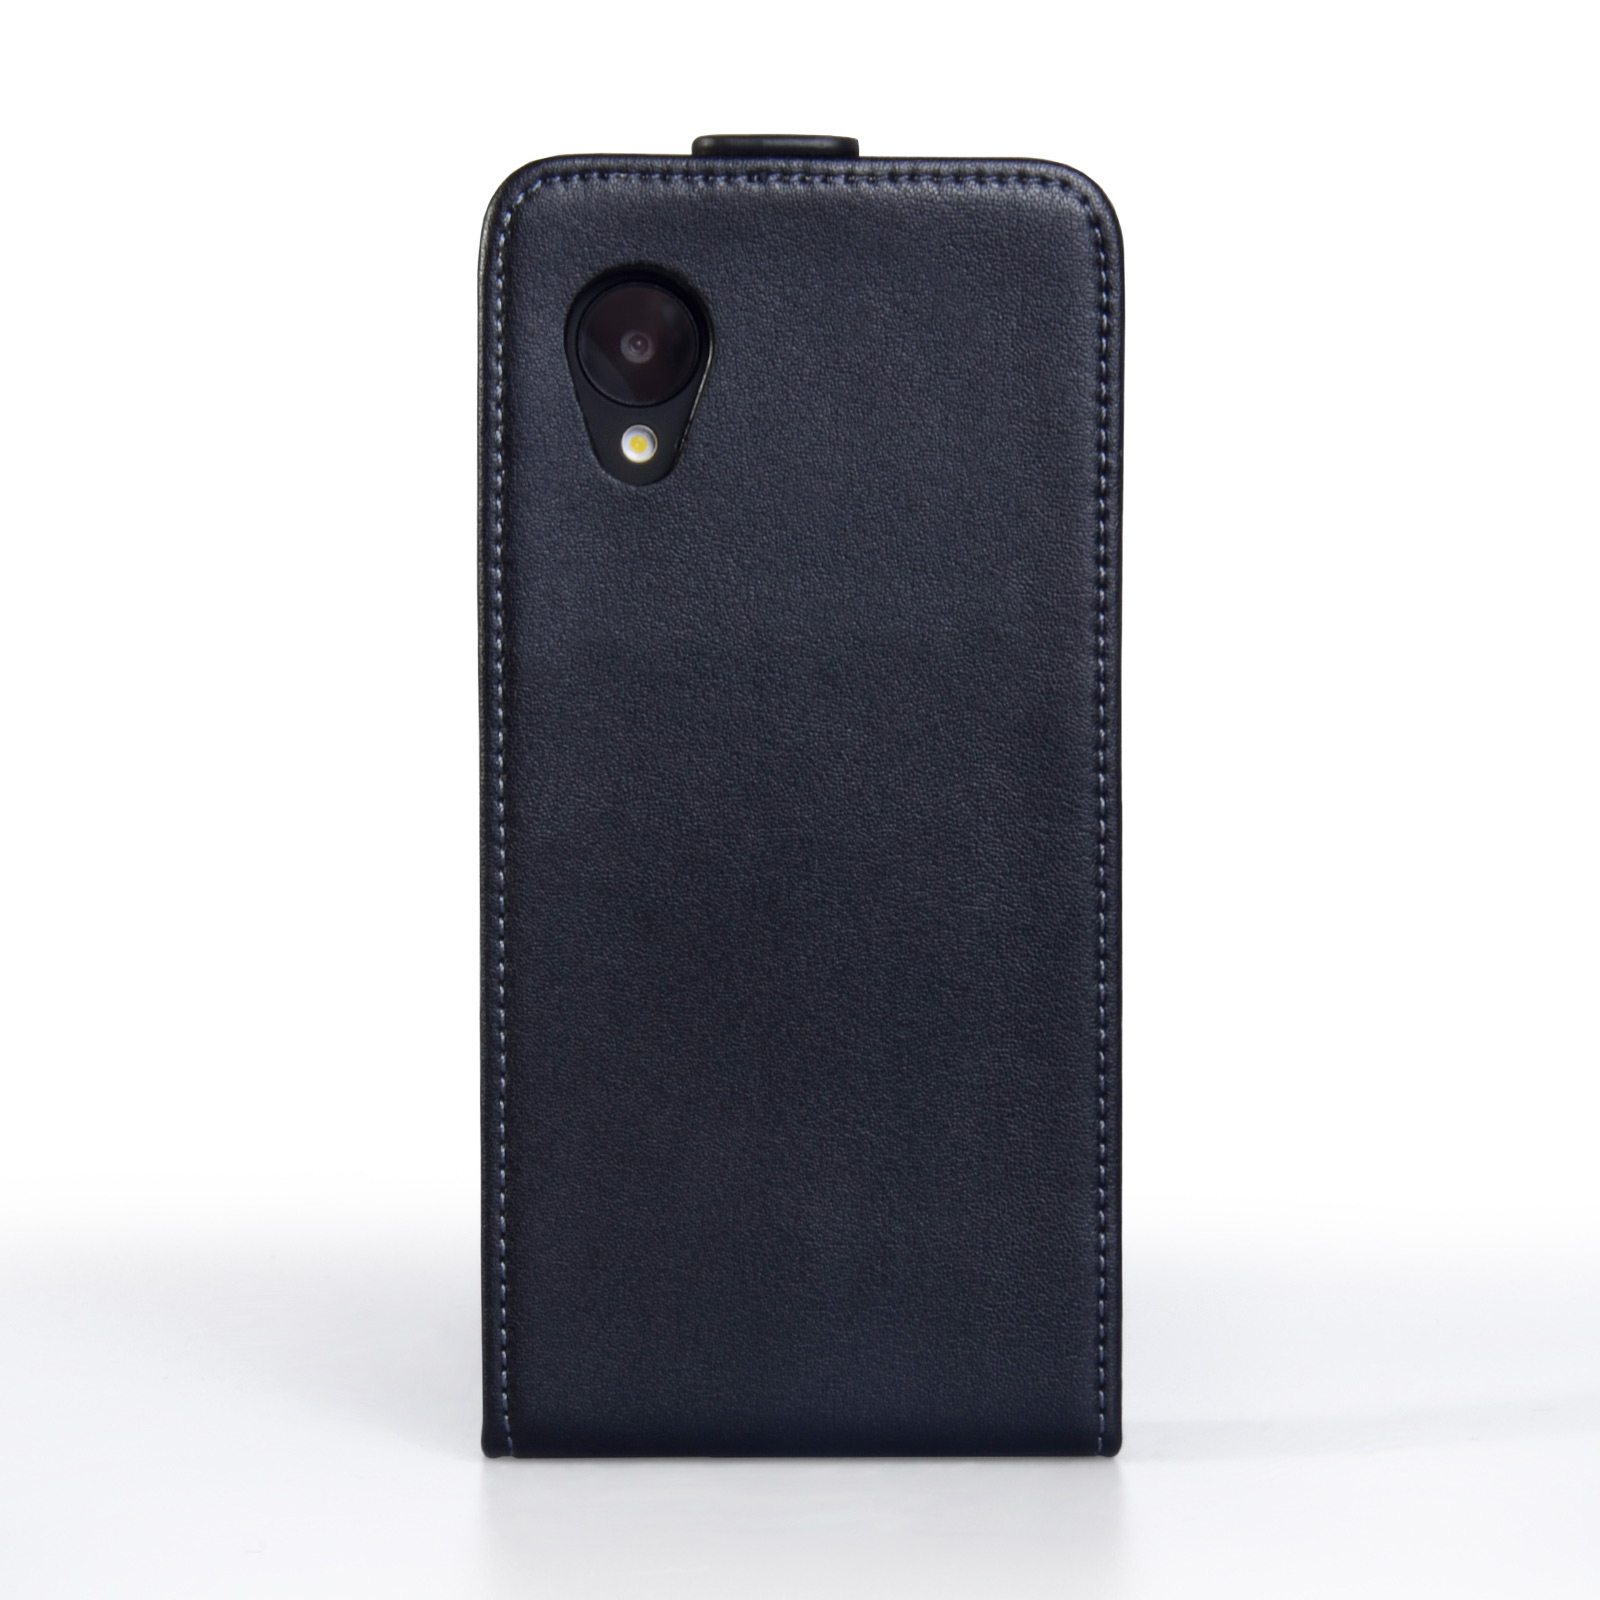 YouSave Accessories Nexus 5 Real Leather Flip Case - Black